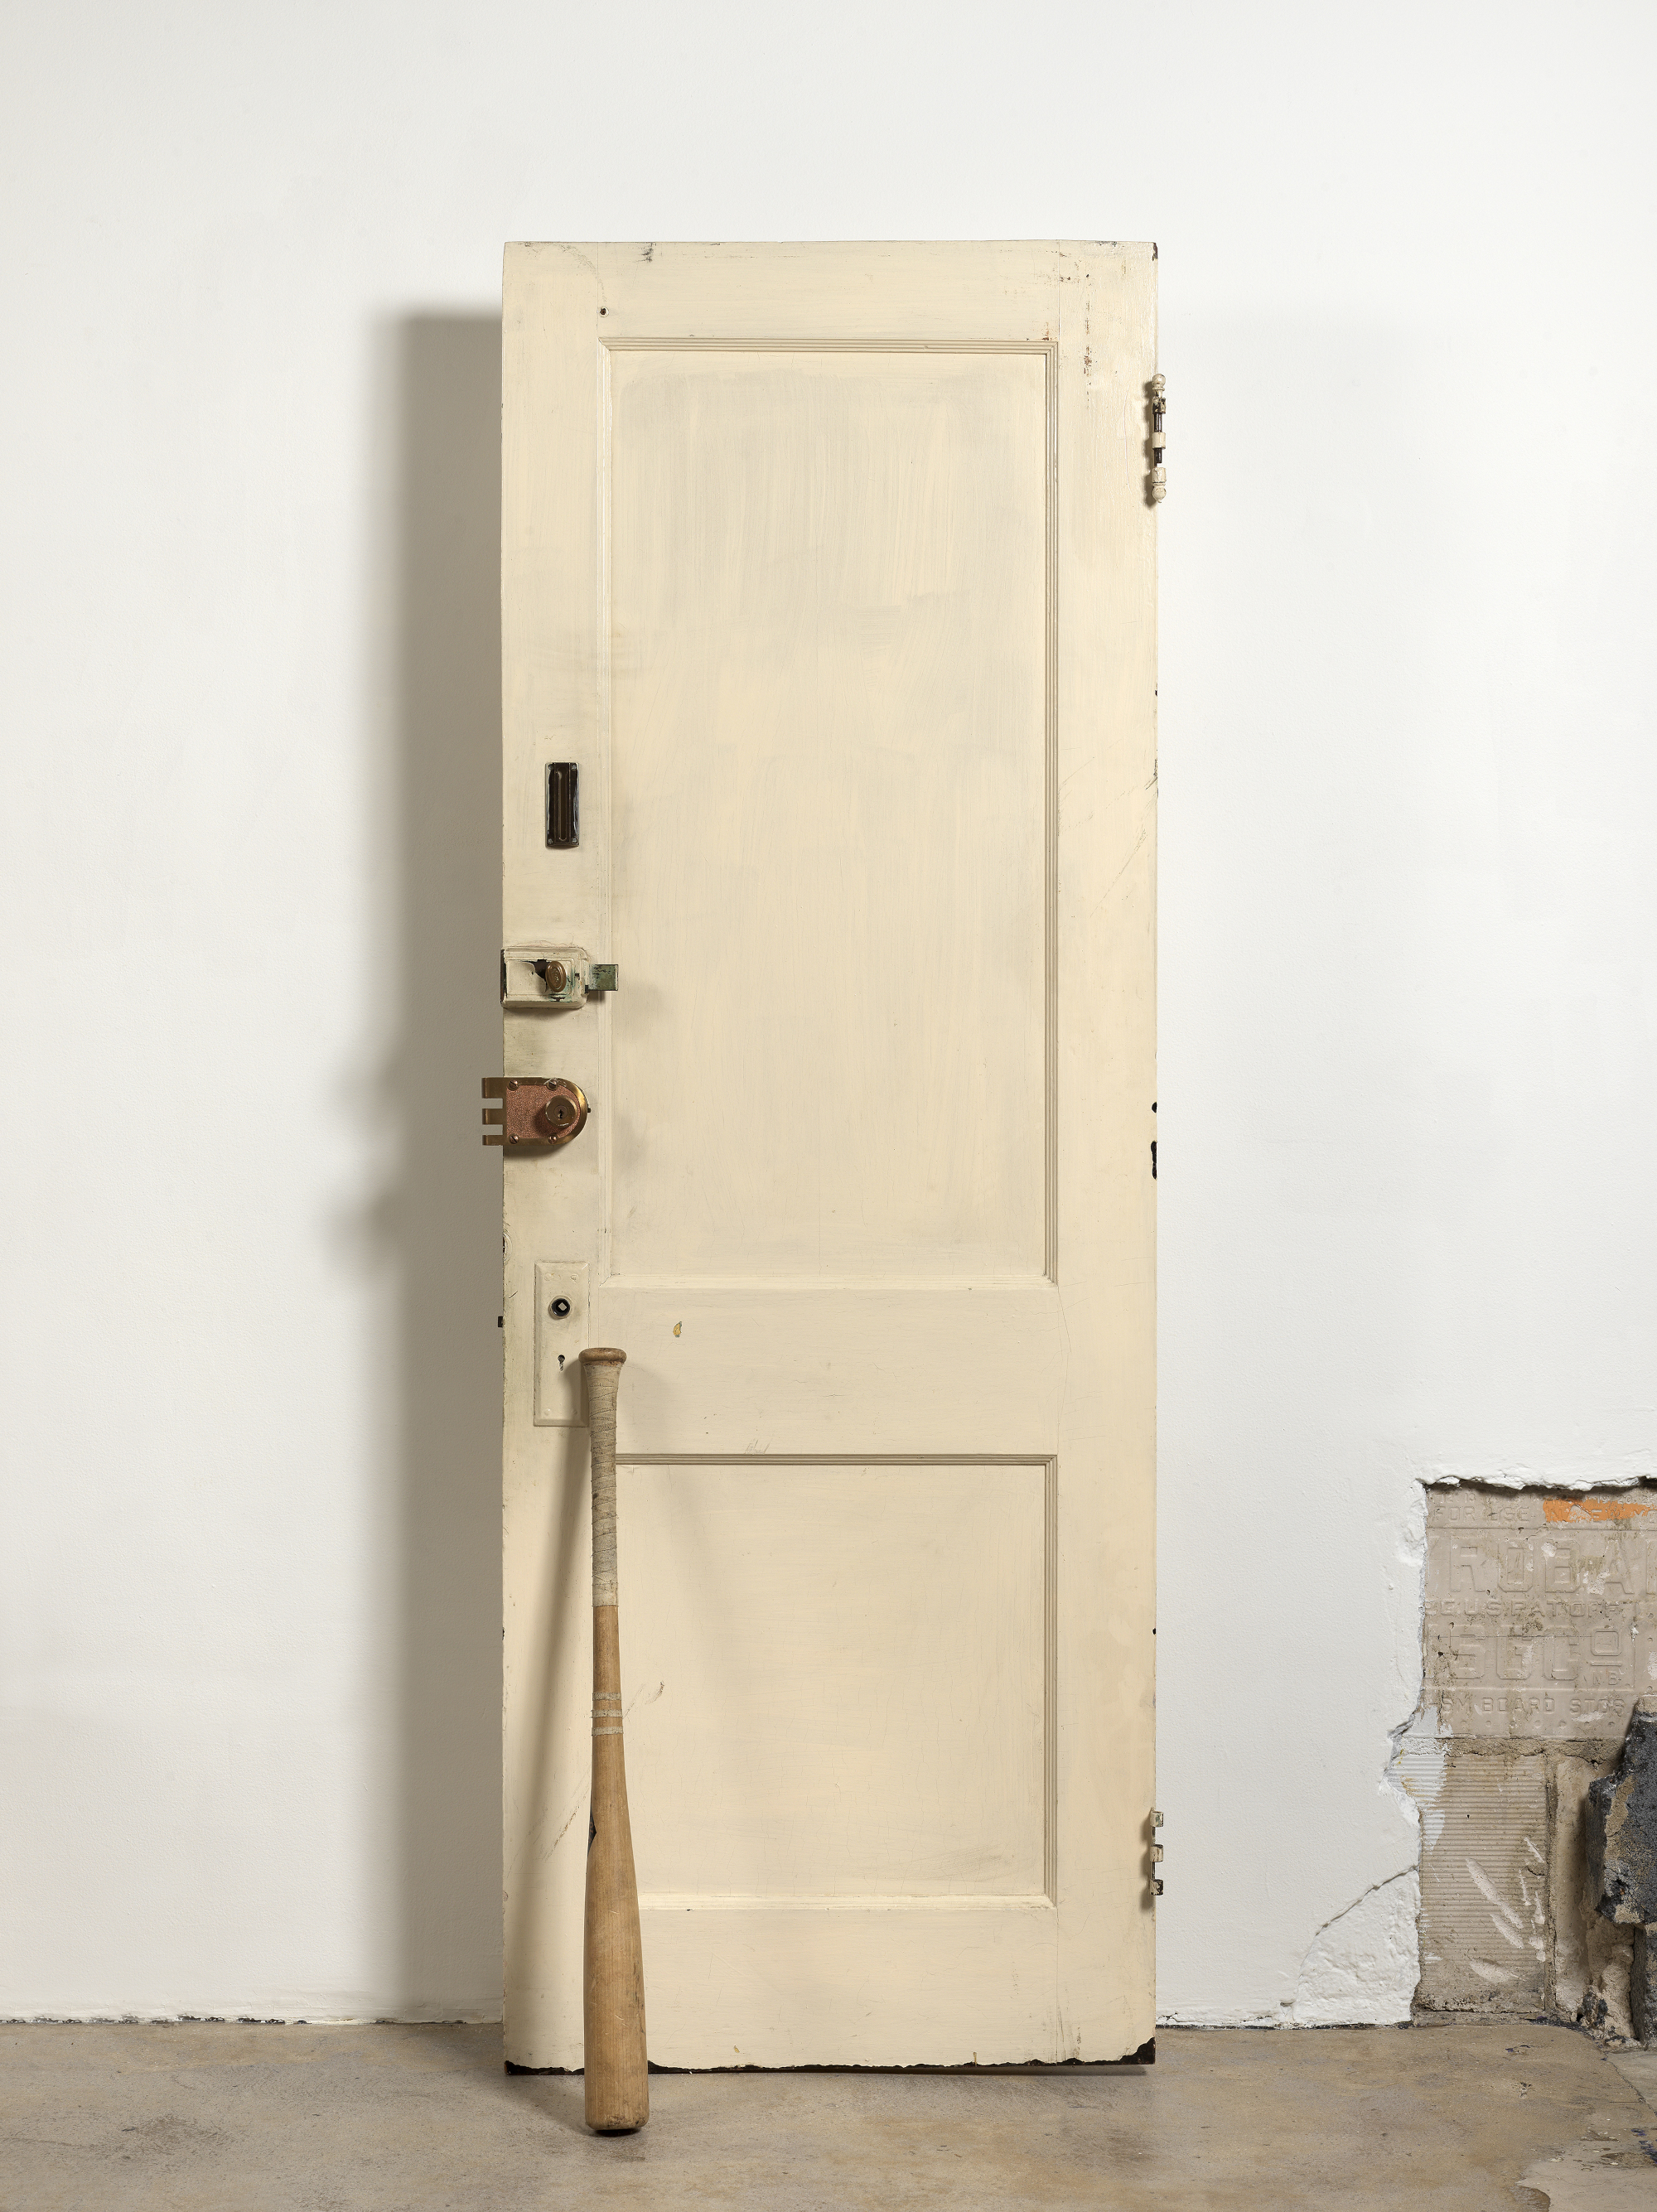 Diamond Stingily, Entryways, 2016. Door with locks, bat, 79 x 25 in (200.7 x 63.5 cm). Collection Dr. Gerardo Capo. Courtesy the artist and Queer Thoughts, New York.